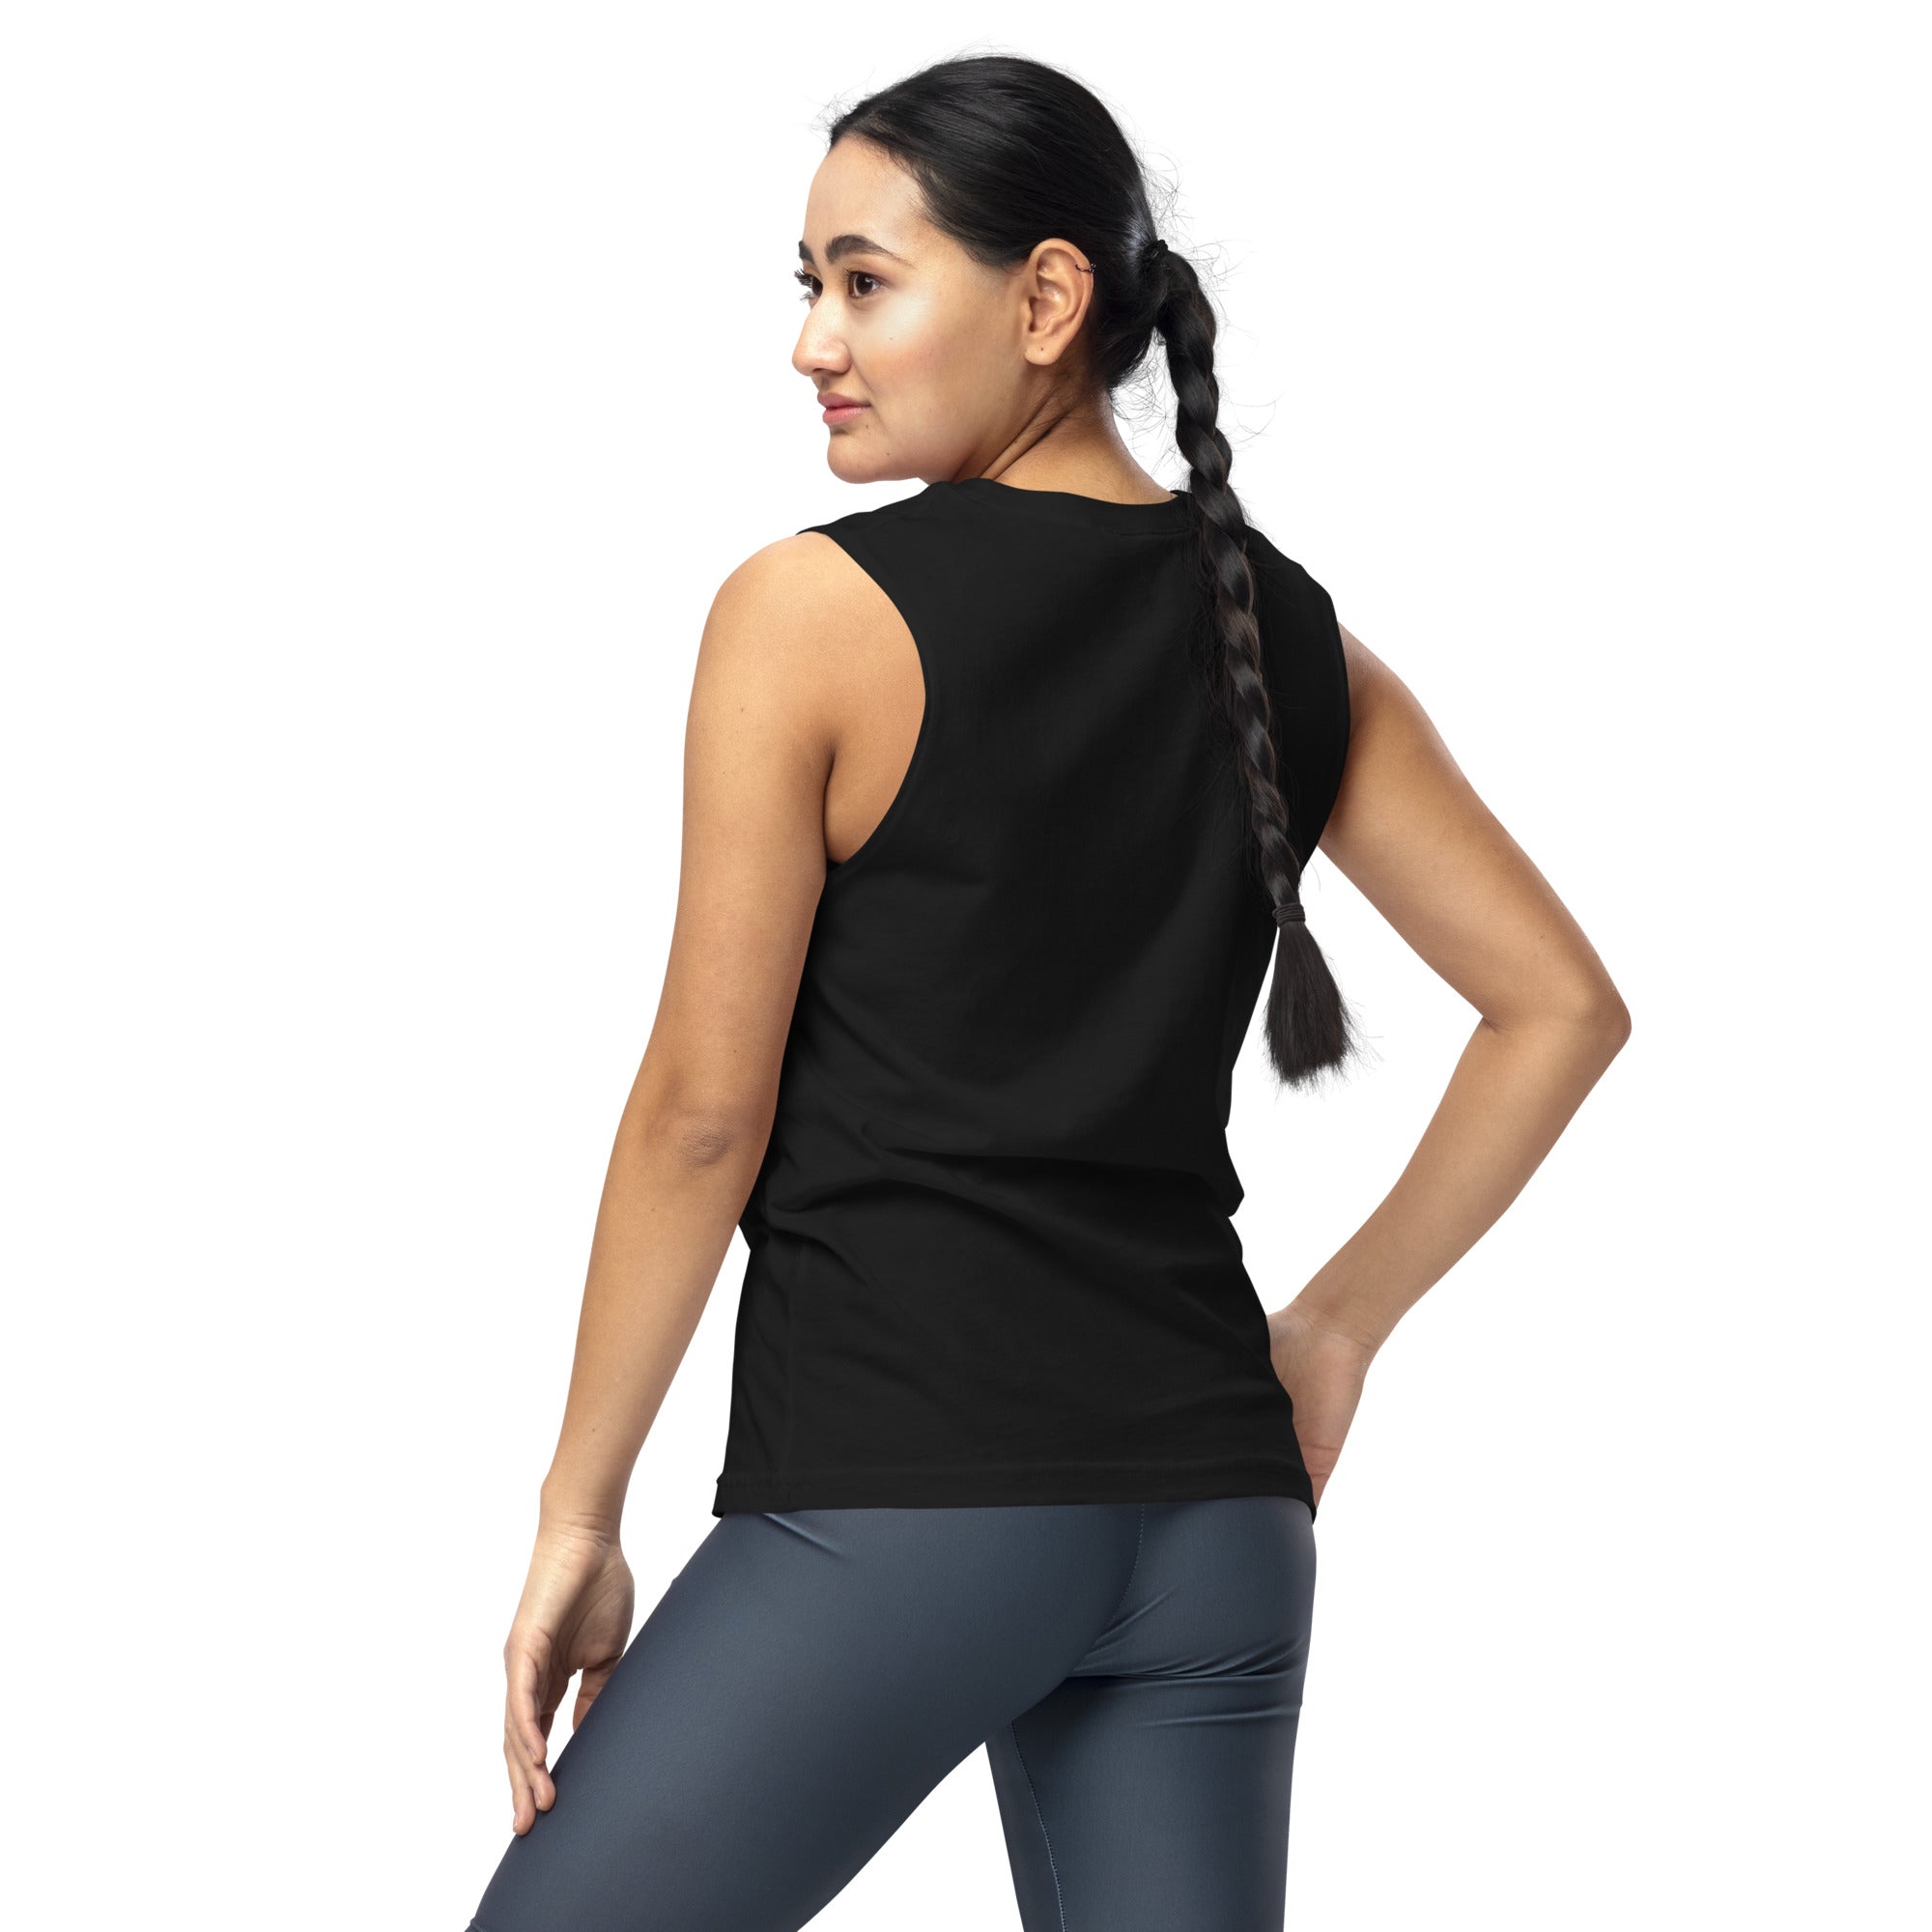 Women's Gym Tank Top - Revive Wear     Shop Women's Tank Tops. Comfortable sleeveless tank tops for active women. Loose, lightweight tops perfect for gym workouts, yoga, running, and more.